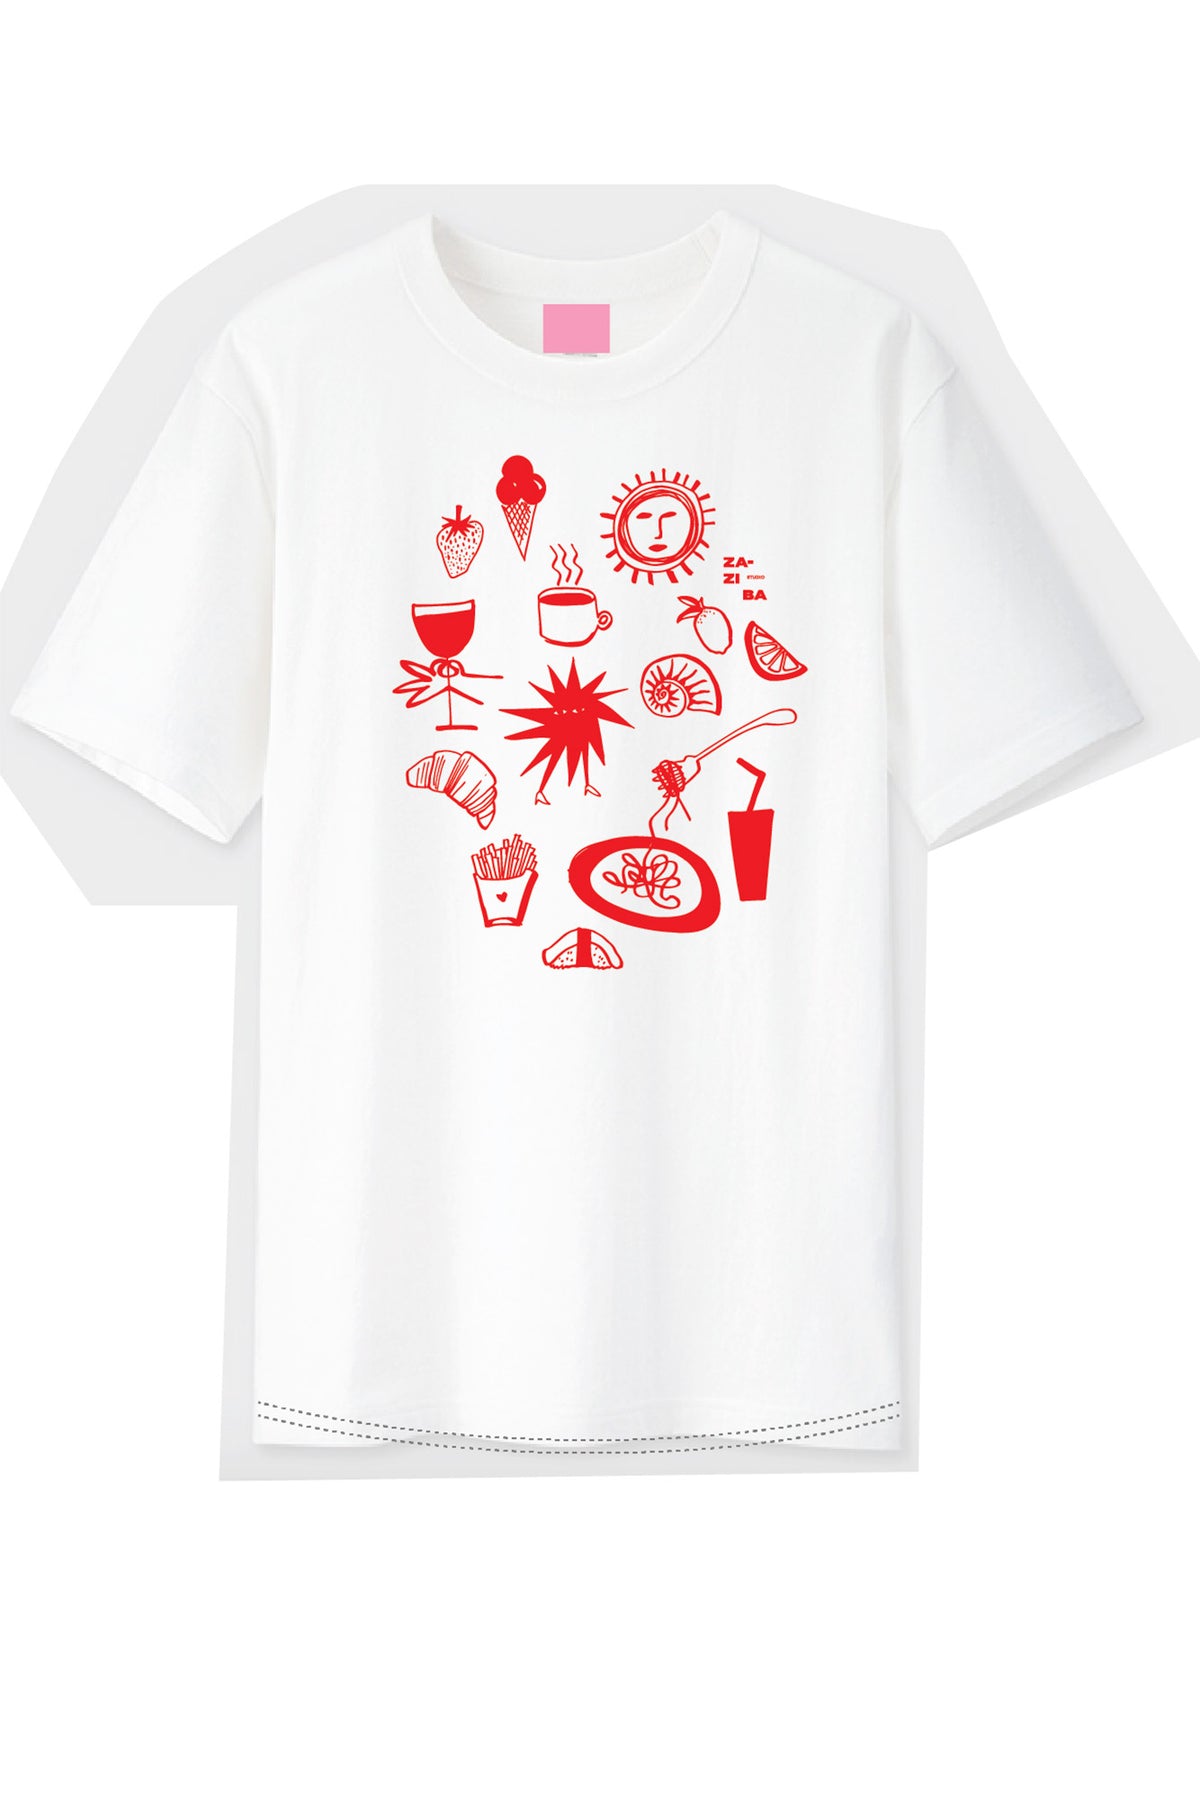 white crew neck tshirt with red print